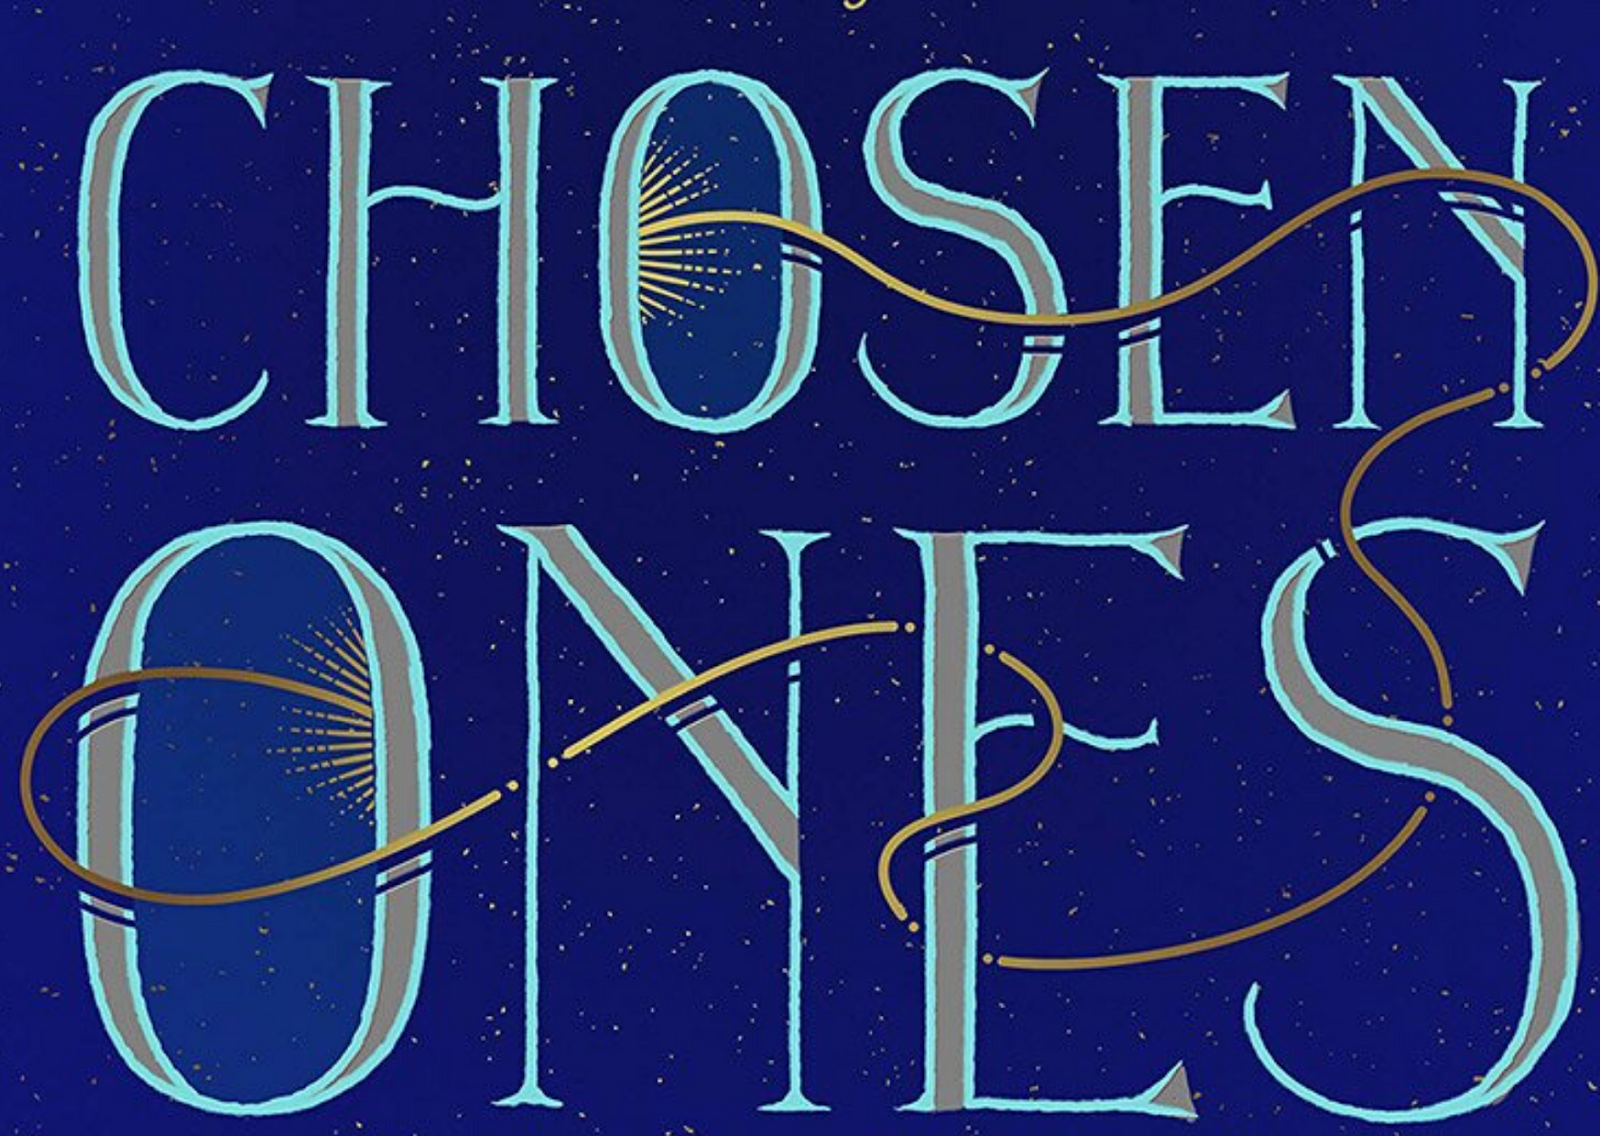 Book Review: Chosen Ones by Veronica Roth – ThatBookGal Blogs